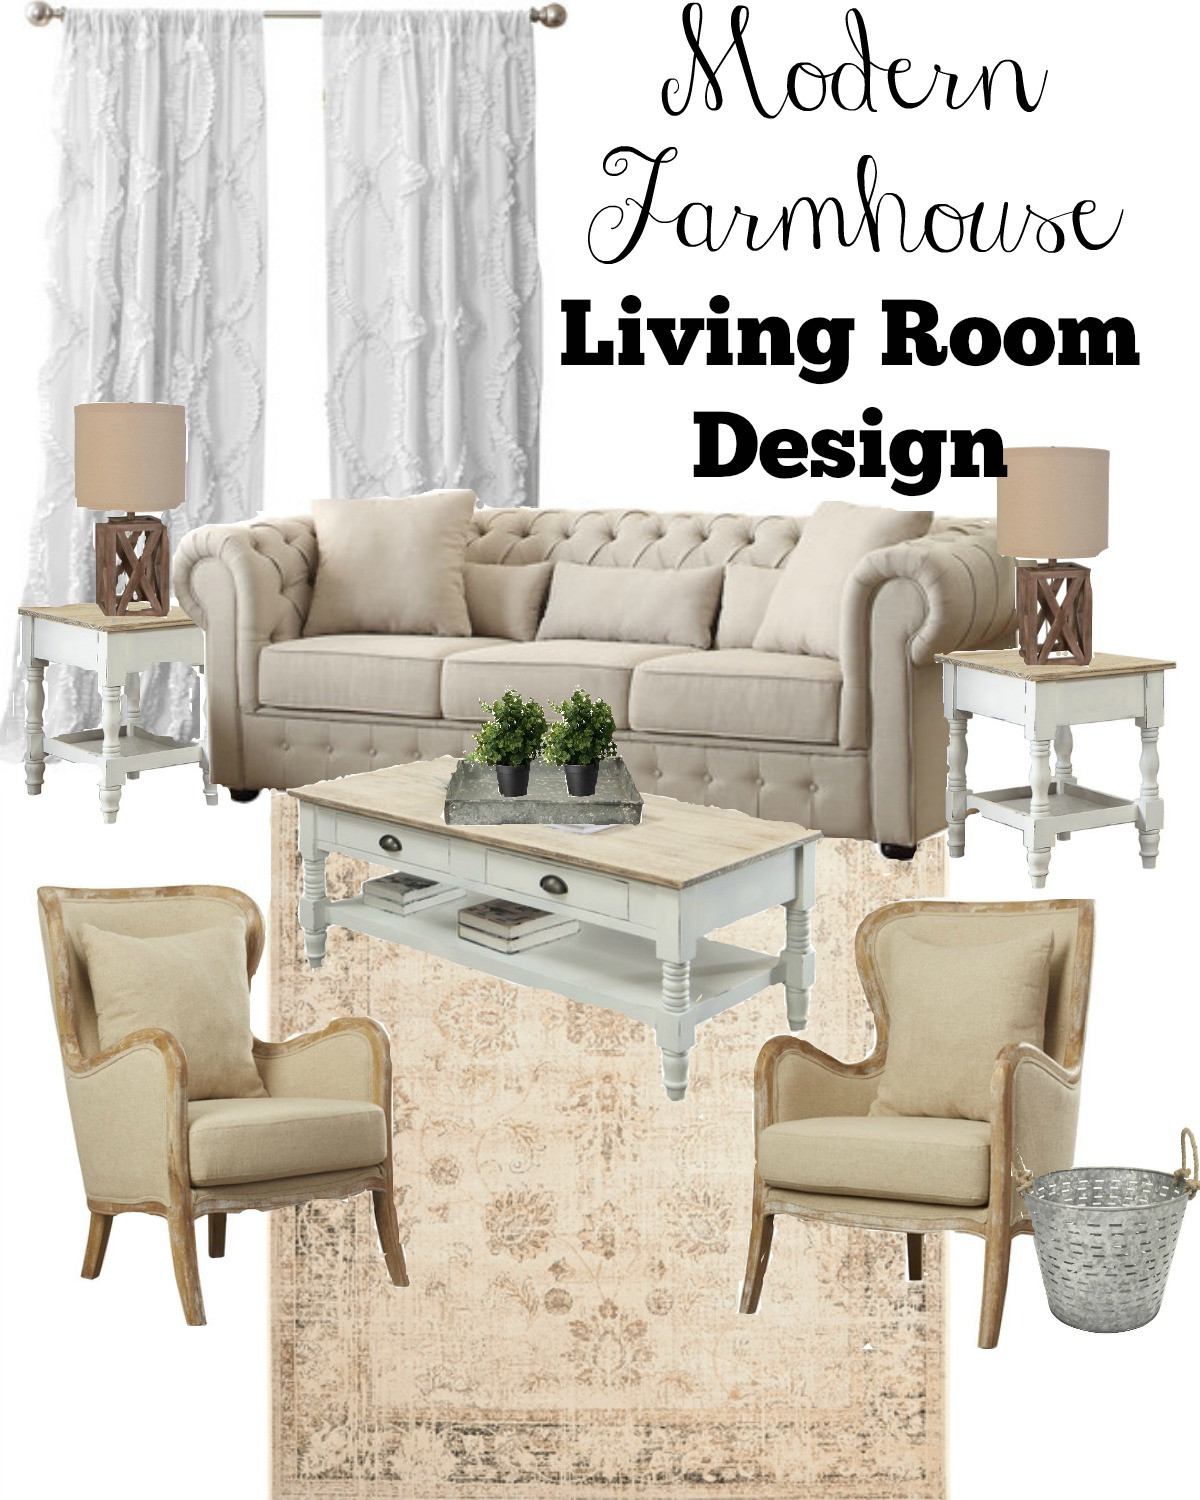 Farmhouse Living Room Chairs
 3 Key Tips for a Farmhouse Style Living Room